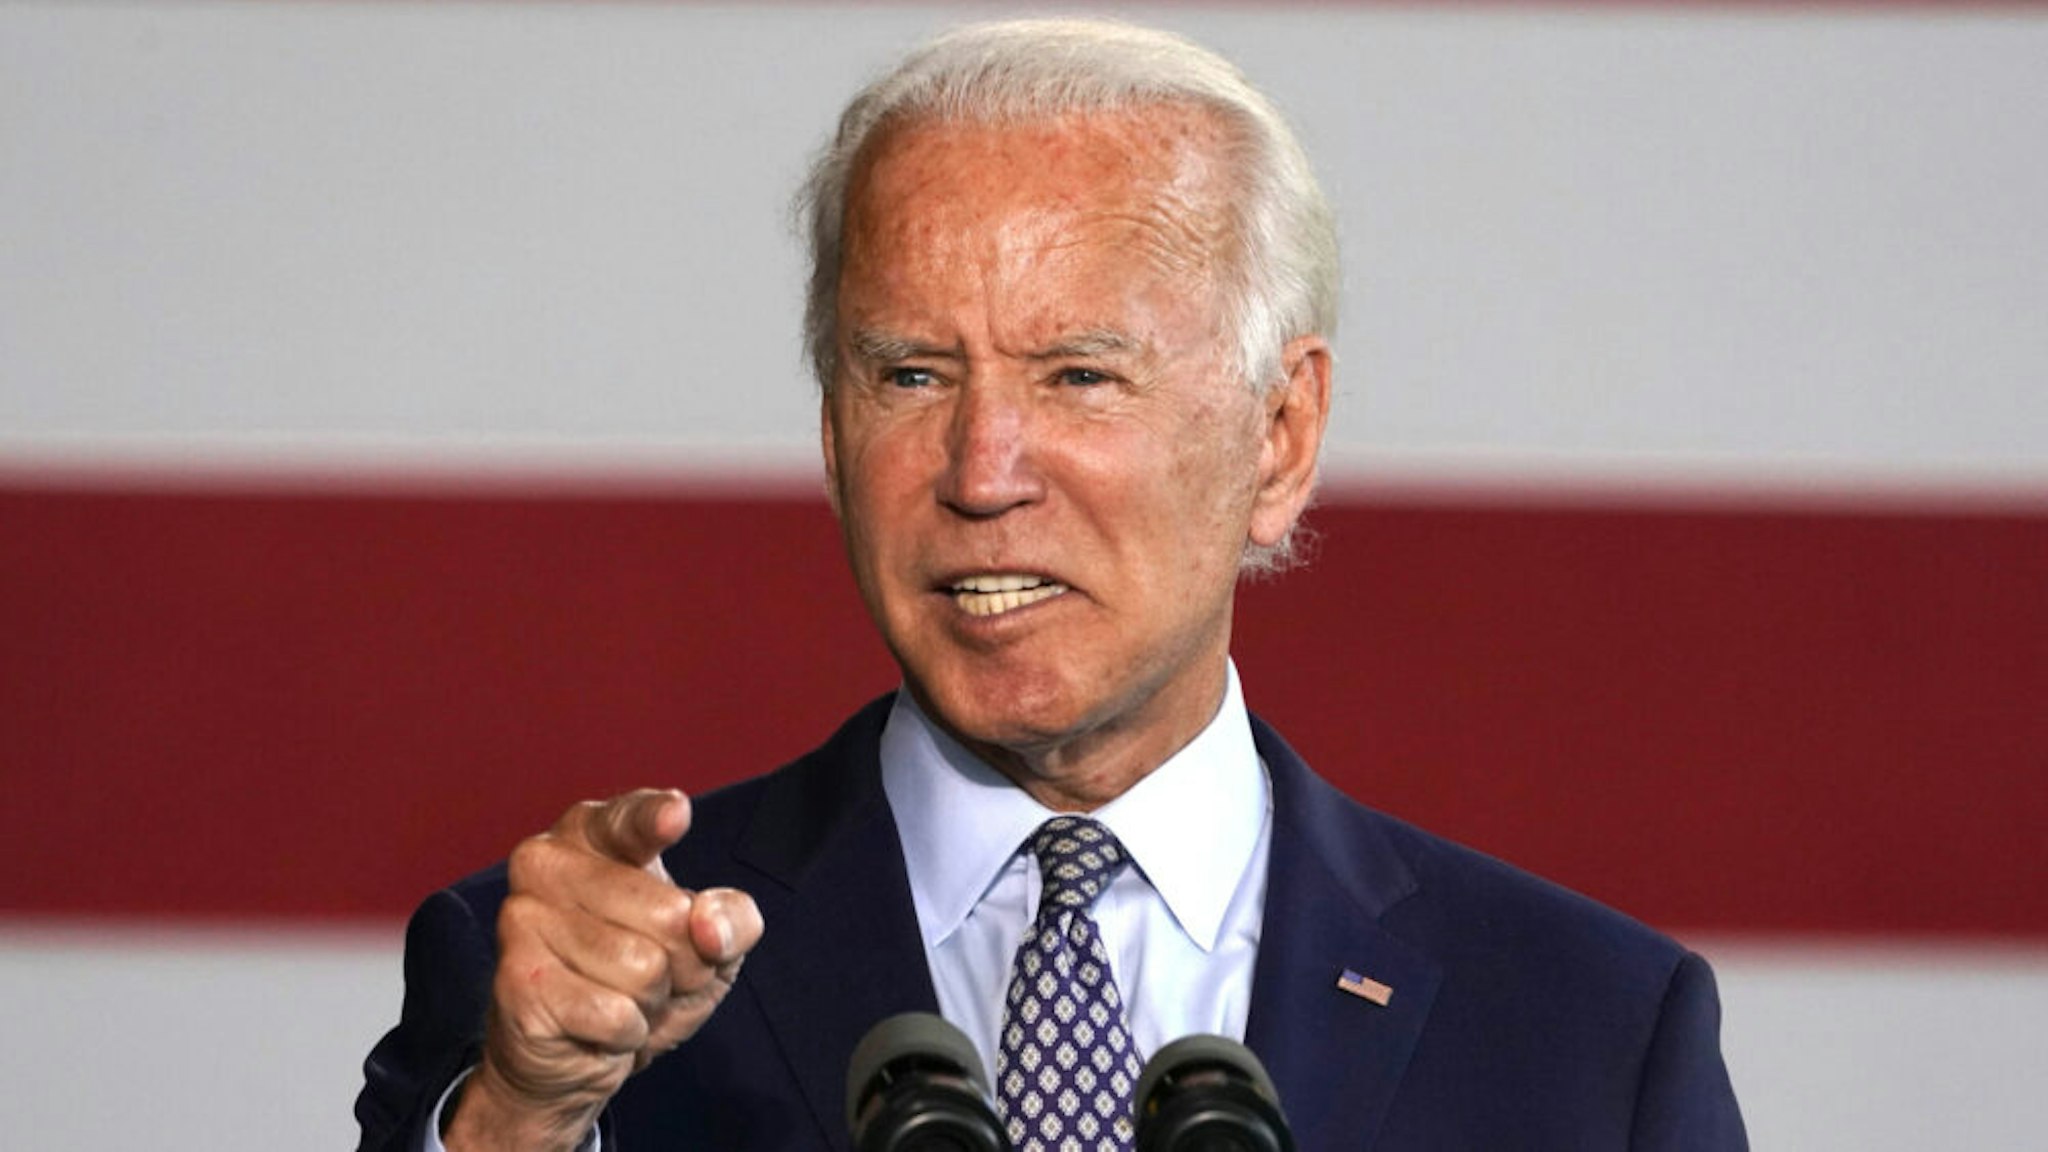 Democratic nominee for president Joe Biden gives a speech to workers after touring McGregor Industries in Dunmore, Pennsylvania on July 9, 2020.